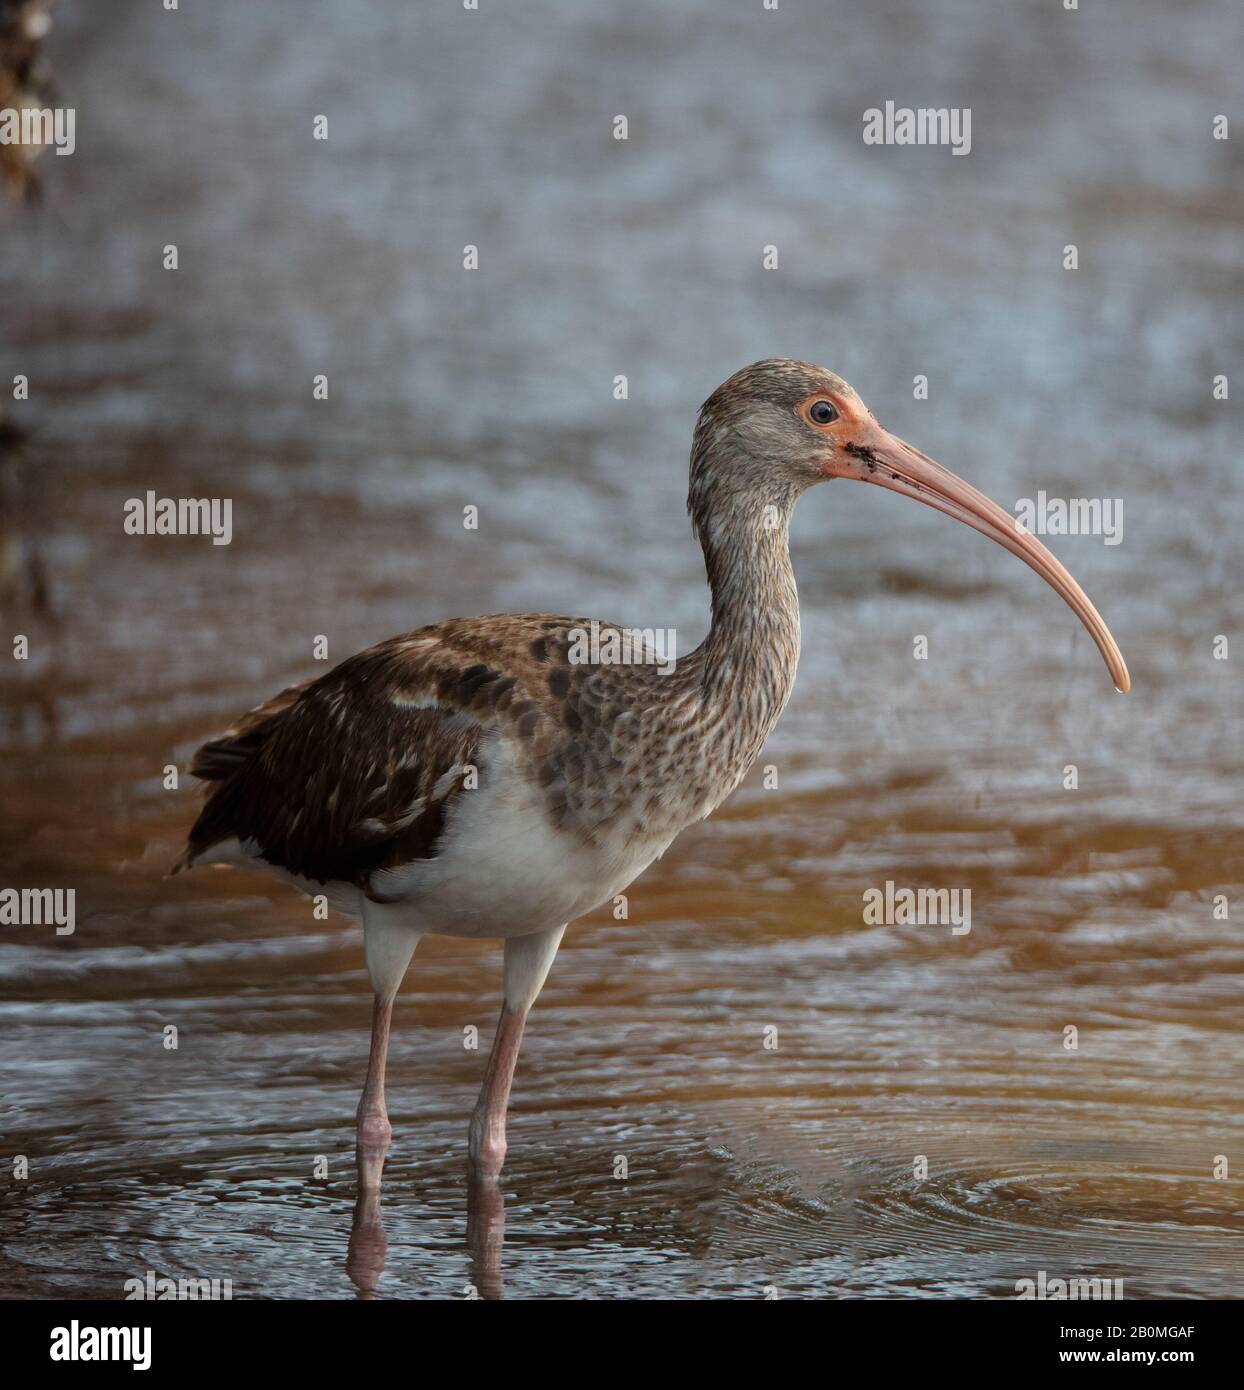 An immature white ibis (Eudocimus albus) stands in shallow water along the shore of Long Key State Park in the Florida Keys, Layton, Florida Stock Photo